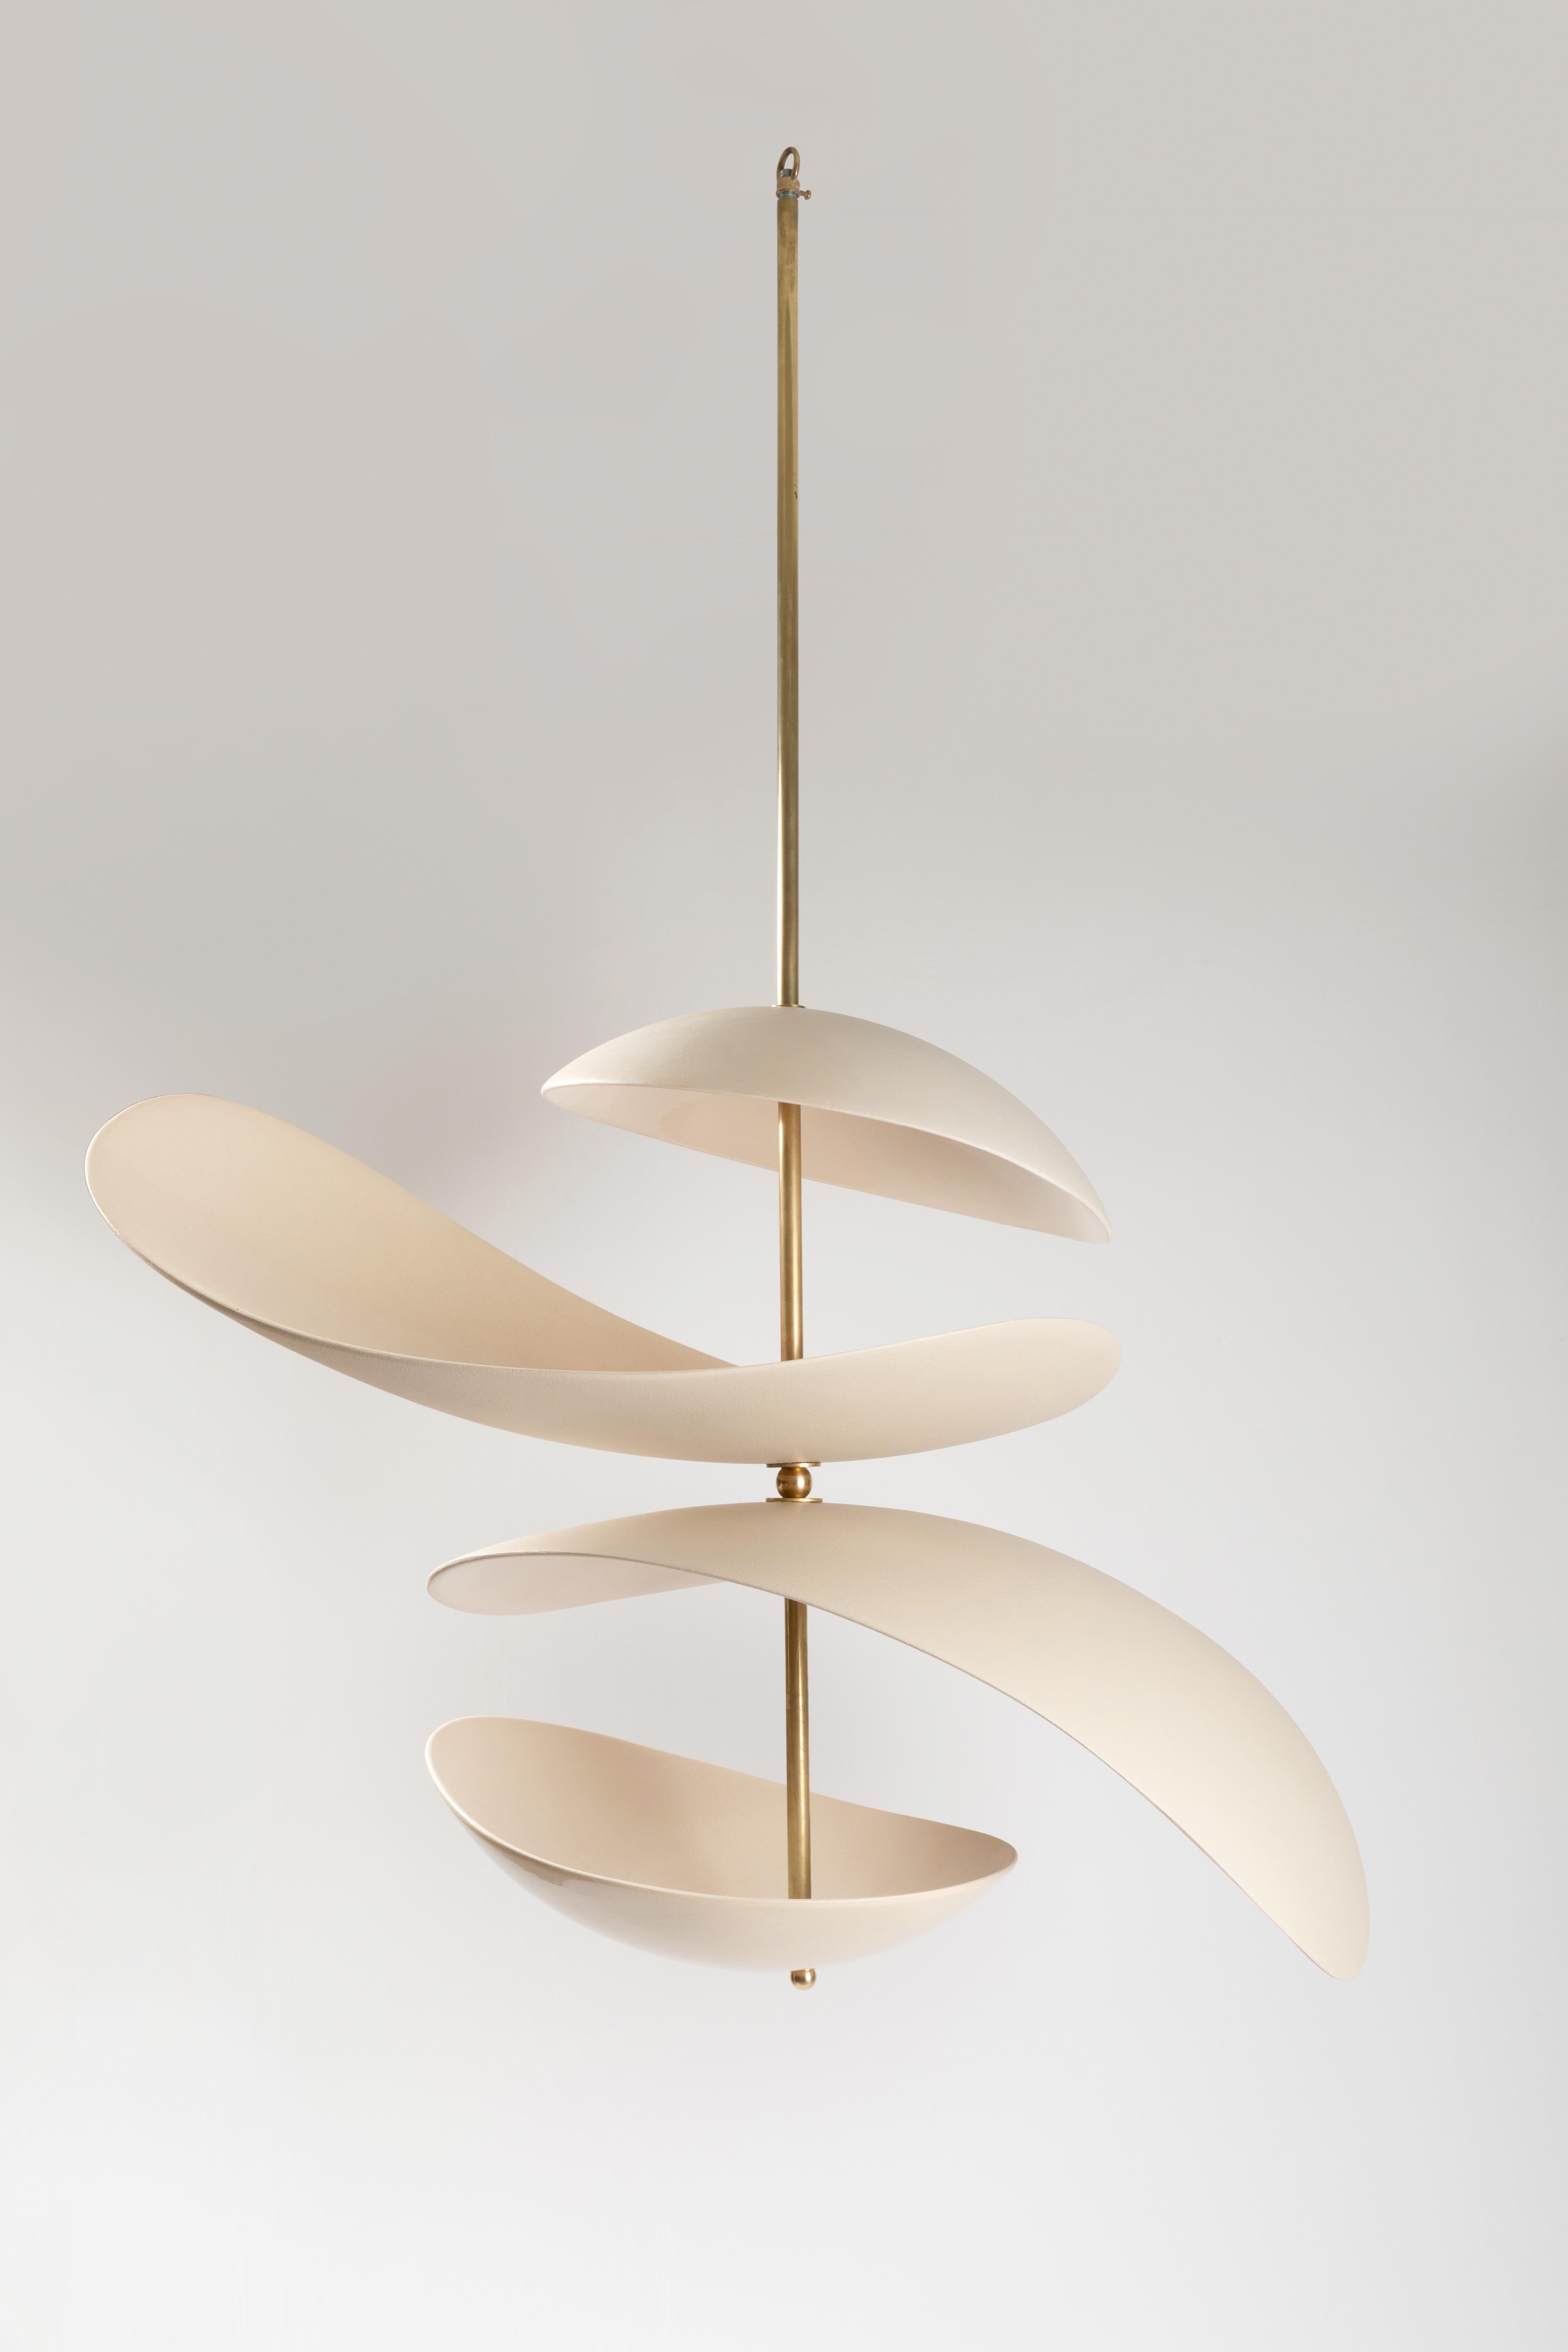 Selene Pendant Lamp by Elsa Foulon
Dimensions: D 75 x H 50 cm 
Materials: Ceramic, brass
Unique Piece
Also available in different options: Bowl or cup (lower part).

All our lamps can be wired according to each country. If sold to the USA it will be